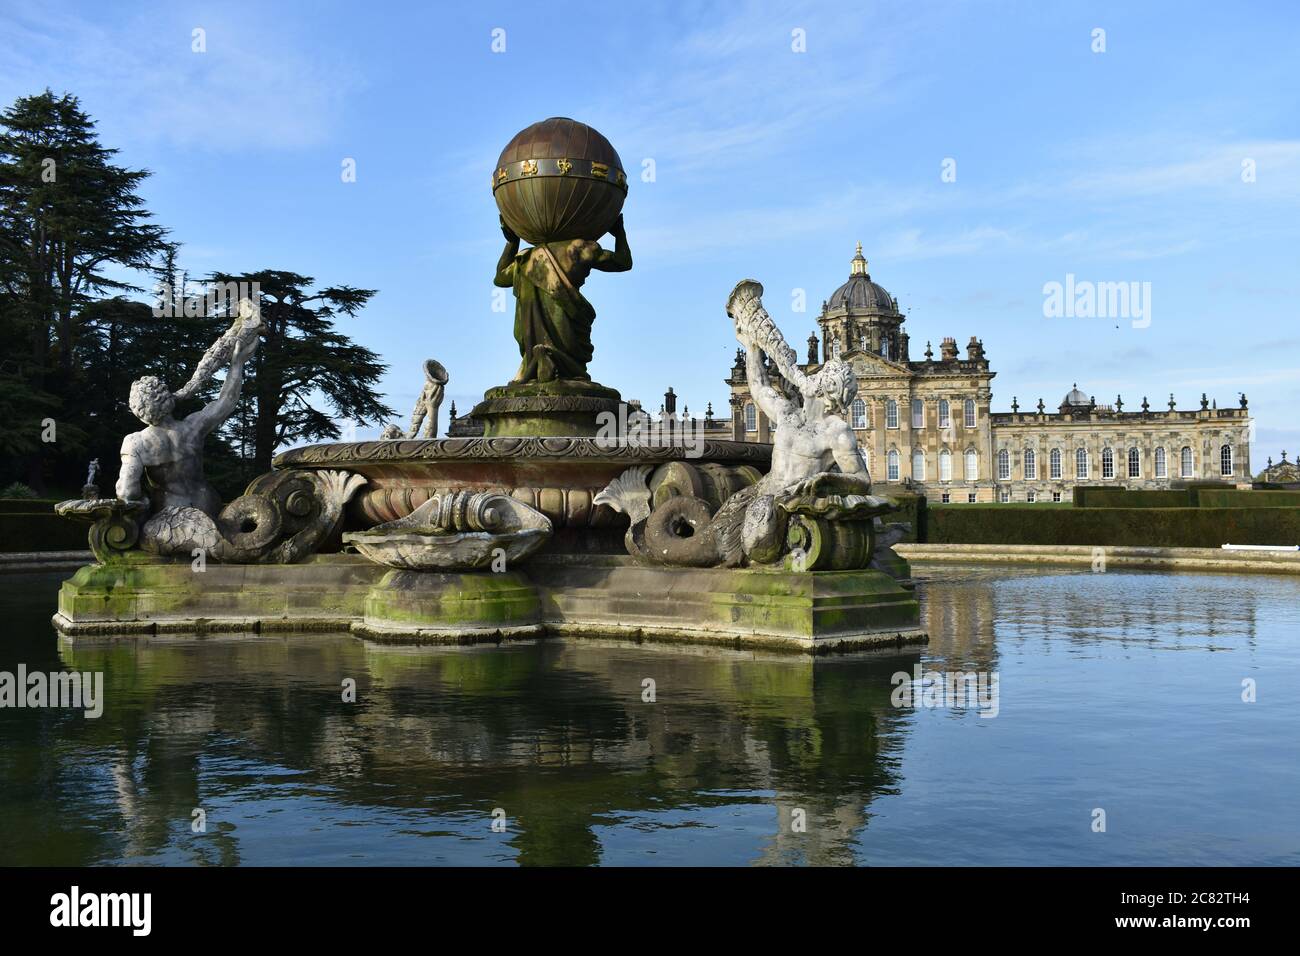 The backside of the Atlas Fountain in front of the South Front of Castle Howard in North Yorkshire. Reflections of the house and fountain in the water Stock Photo